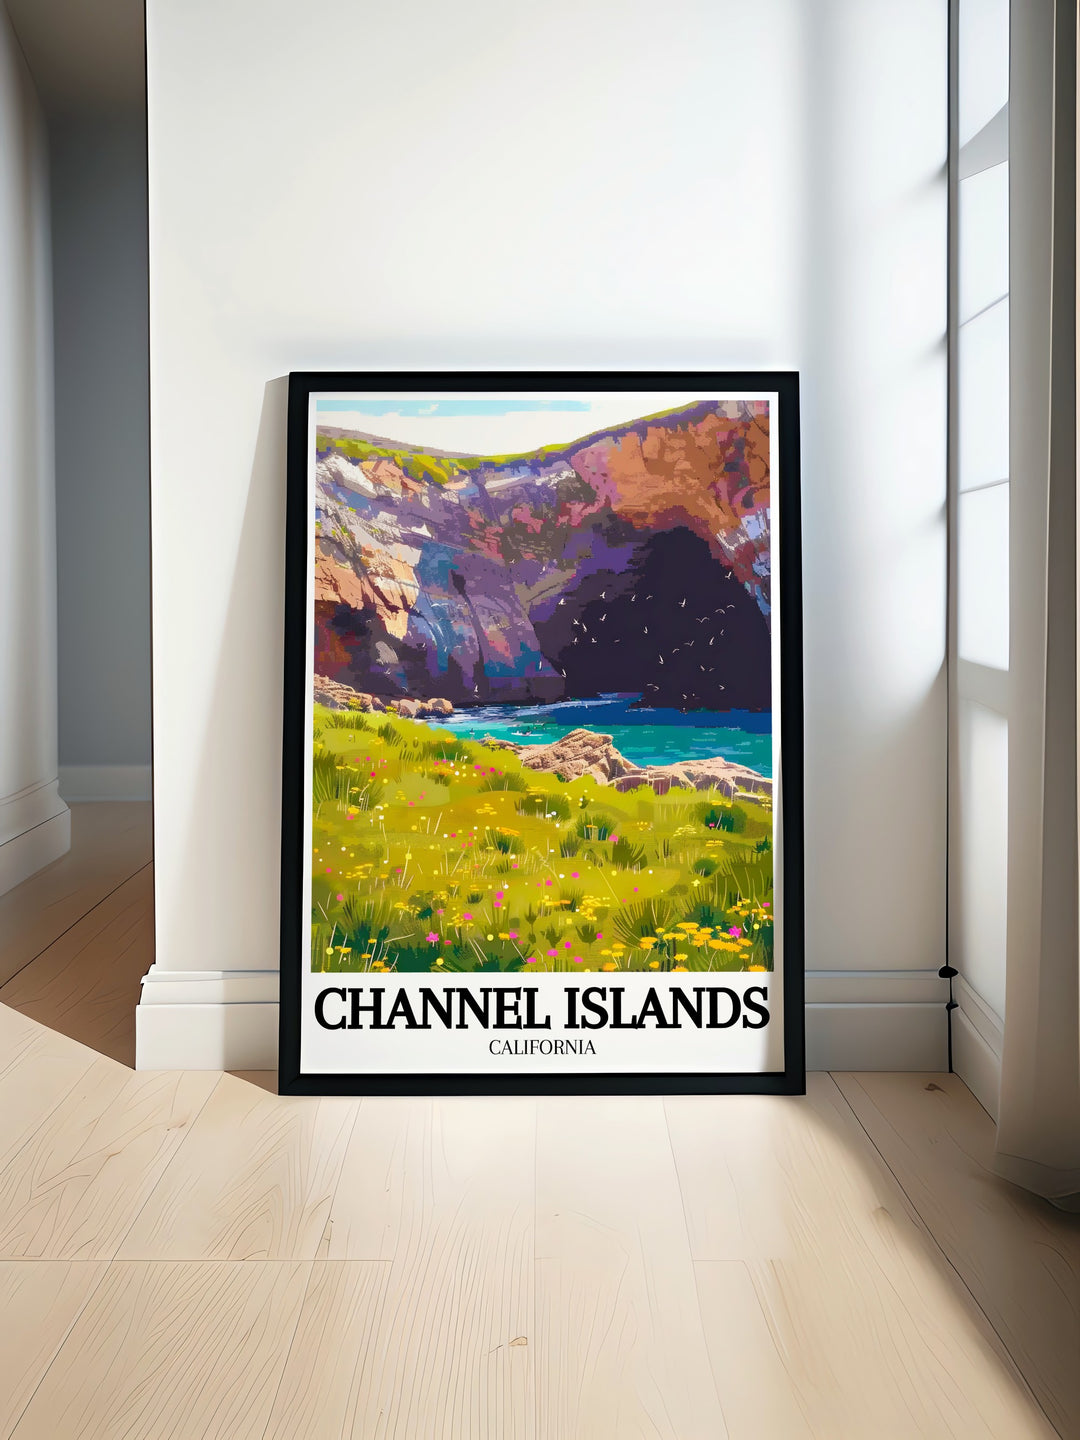 Vintage travel print featuring Santa Rosa Island, Torrey Pines groves and the stunning landscapes of Channel Islands National Park perfect for home decor and National Park enthusiasts who appreciate natural beauty and adventure.